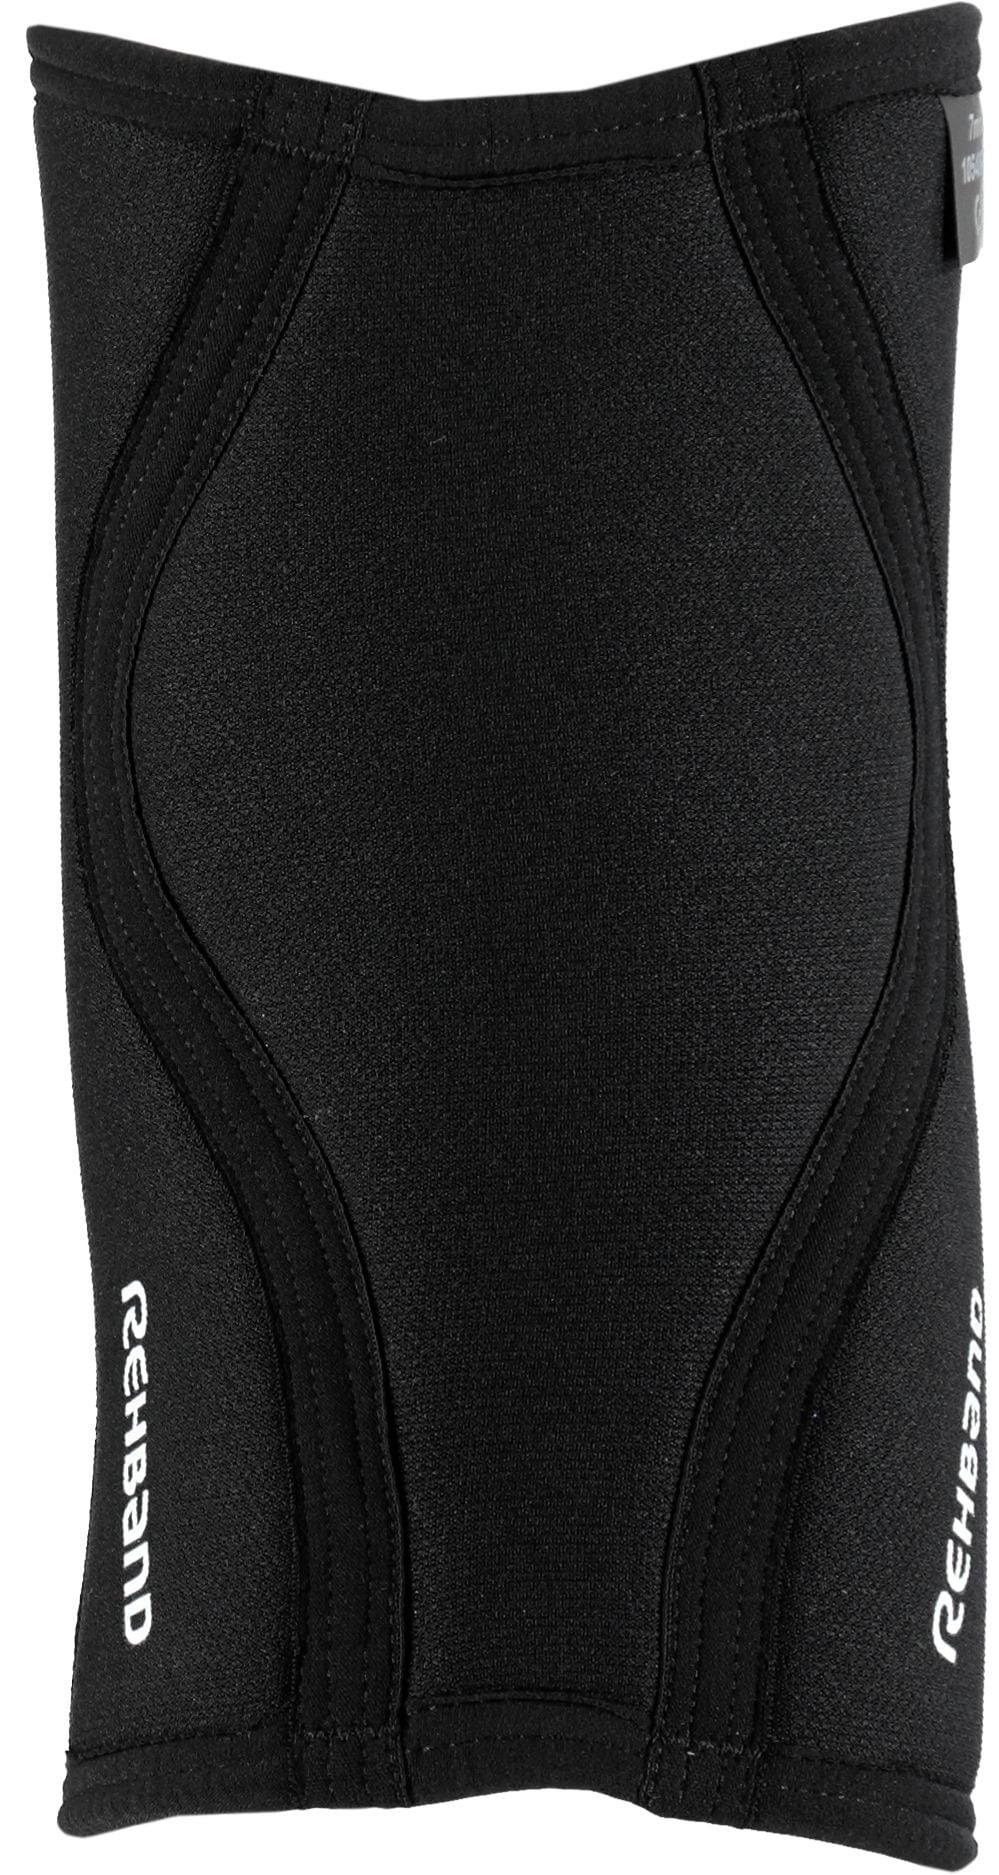 REHBAND, knee support 7mm